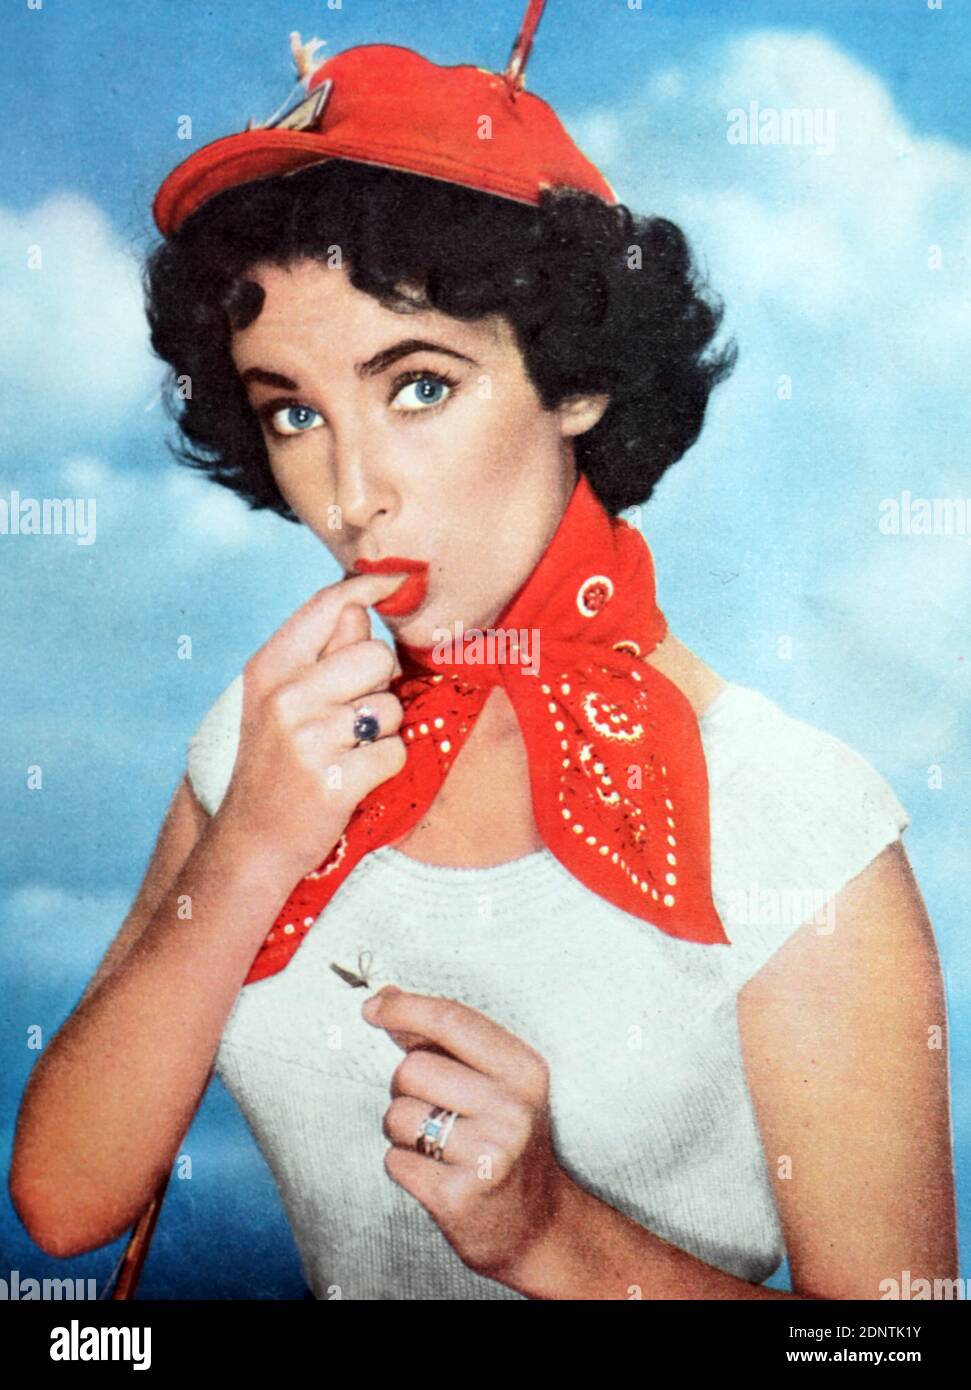 Photograph of Elizabeth Taylor (1932-2011) an English-American actress, businesswoman, and humanitarian. Stock Photo